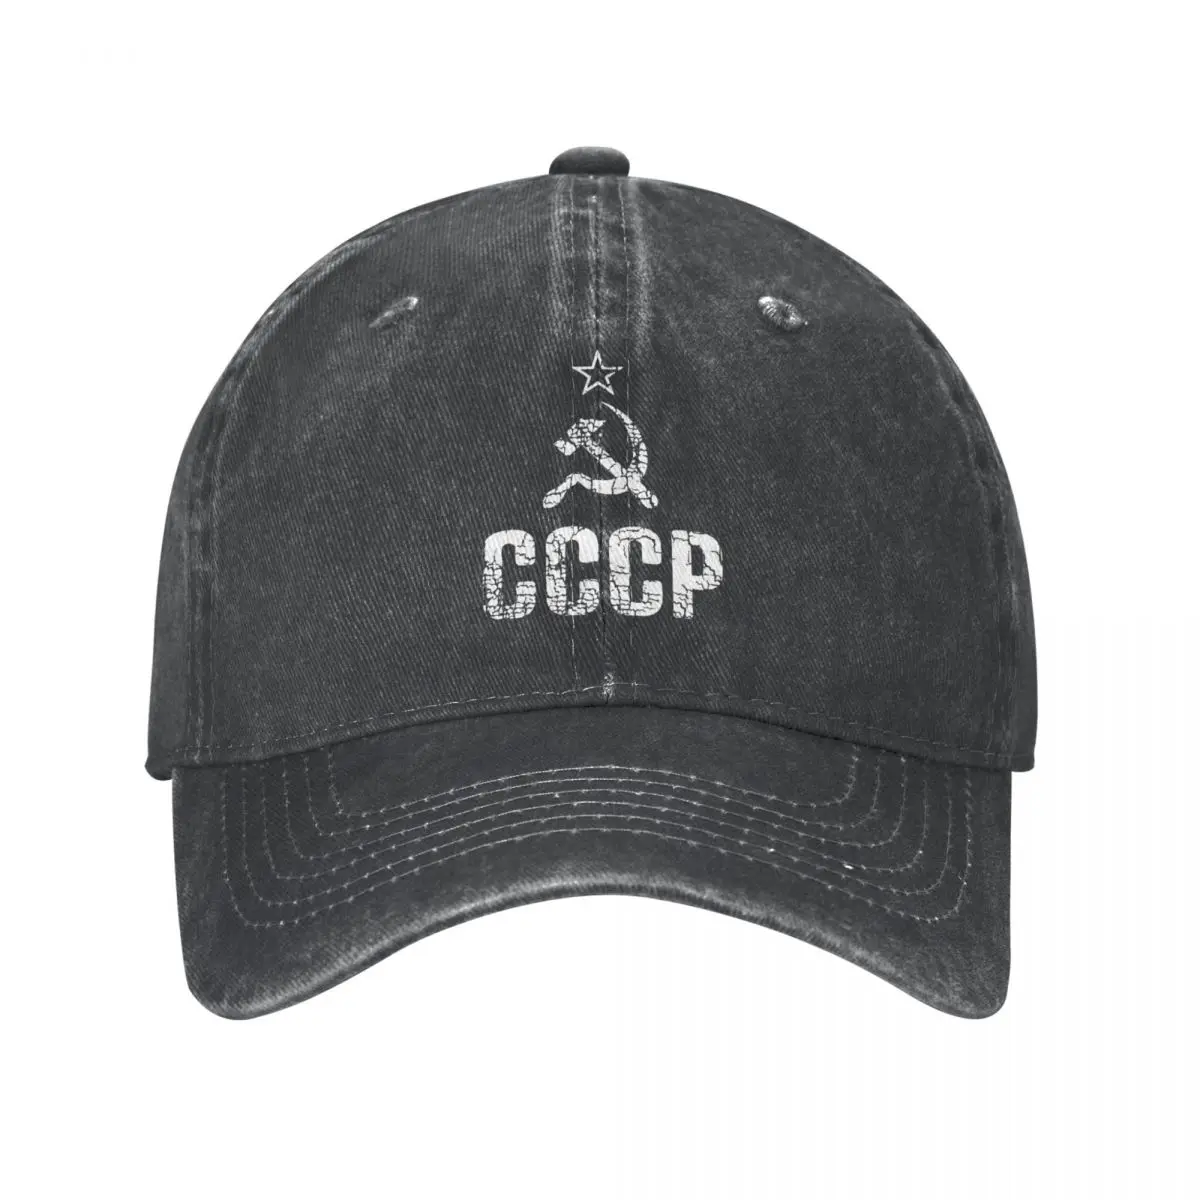 

CCCP Russian Washed Washed Baseball Caps Adjustable Hats Men Women Army National Emblem Cap Hats Spring Autumn Casual Casquette